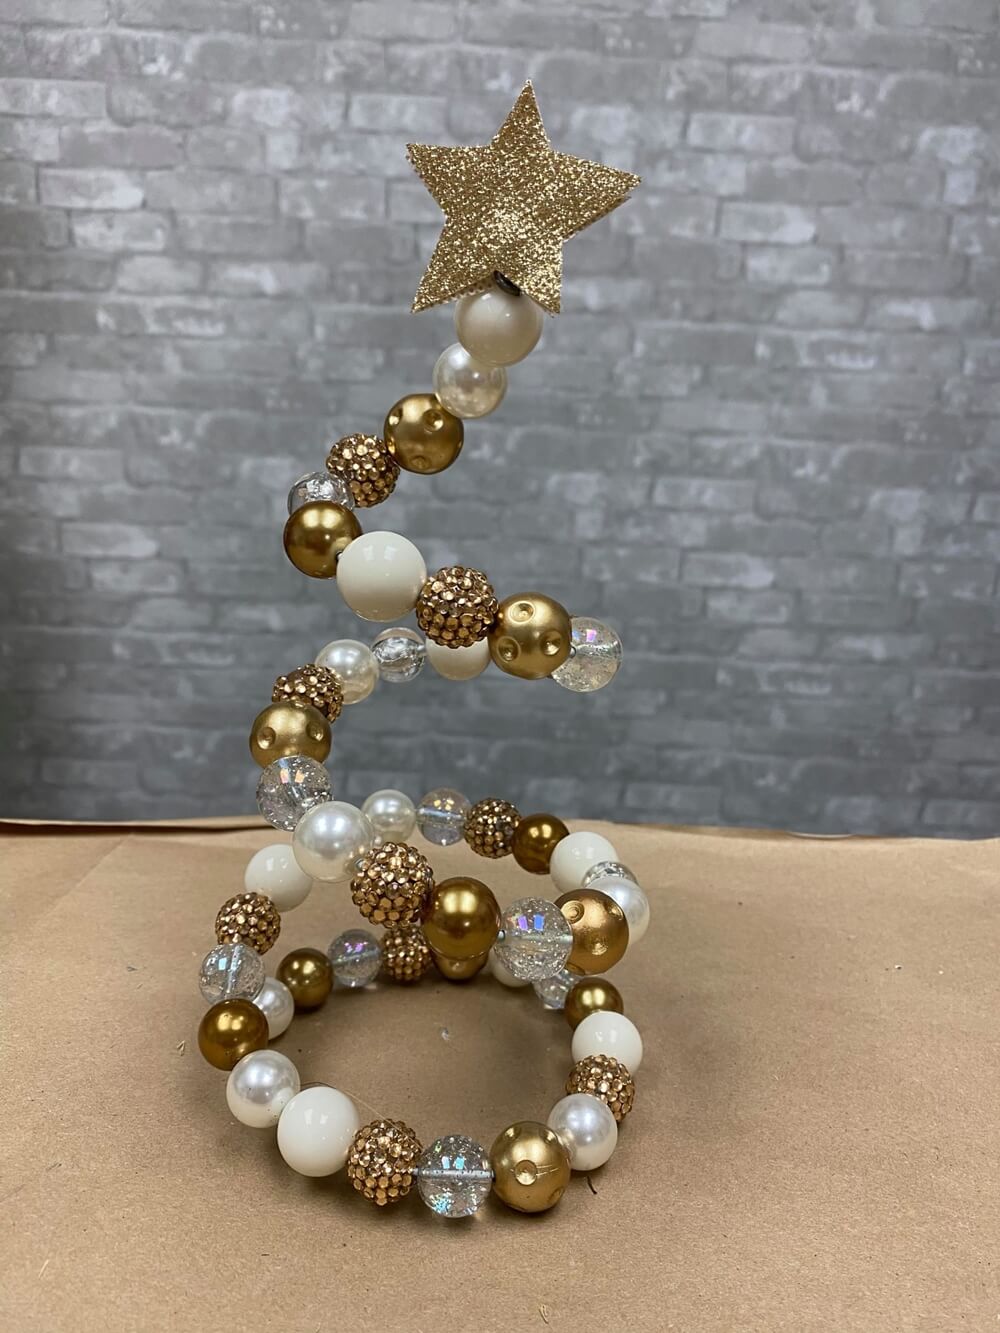 A Bead and Wire Christmas Tree